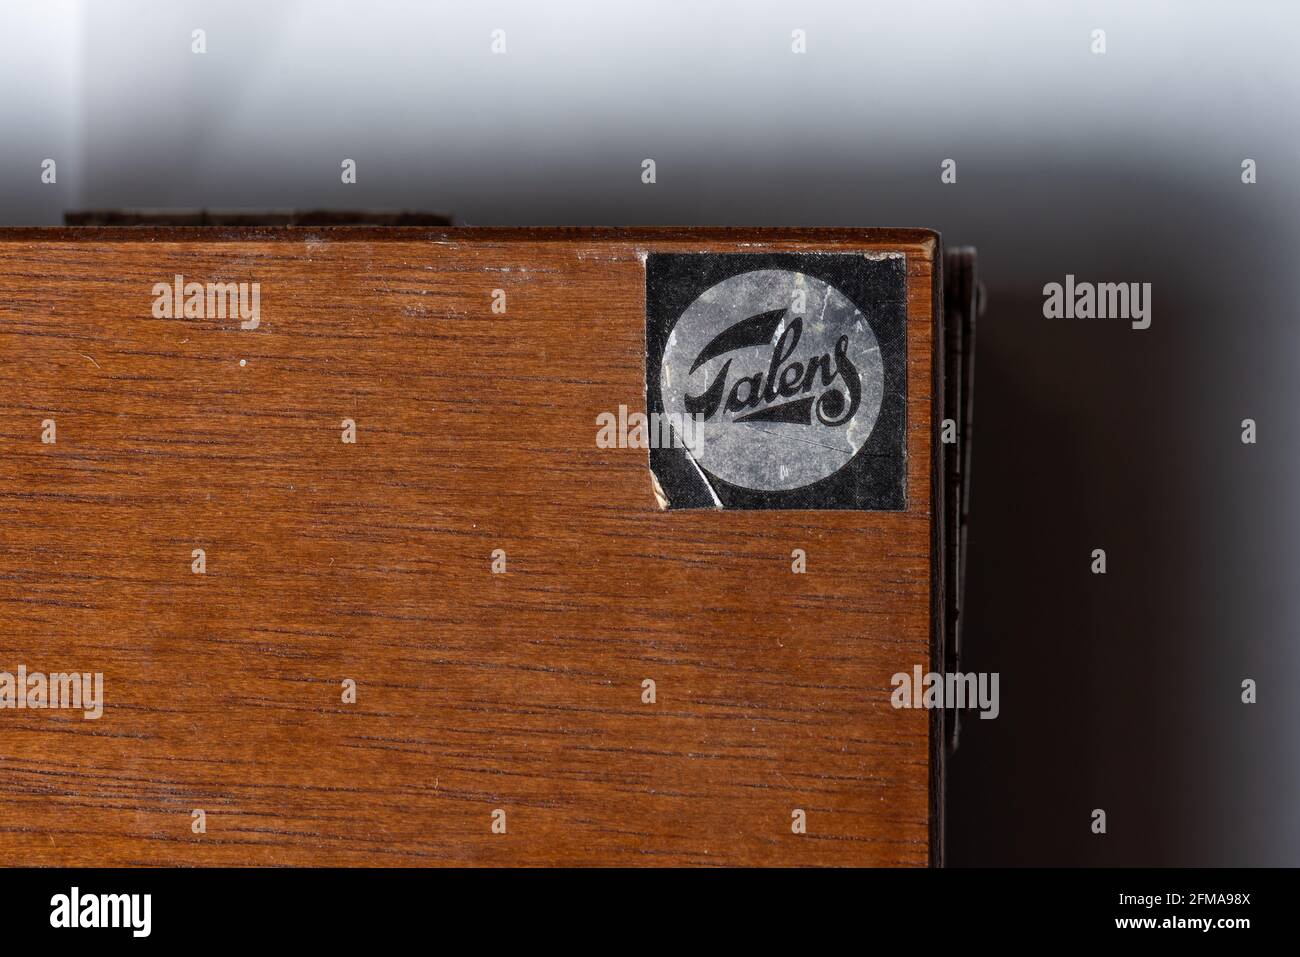 Gothenburg, Sweden - July 2019: Talens logo on a wooden box containing Van Gogh oil colours. Stock Photo